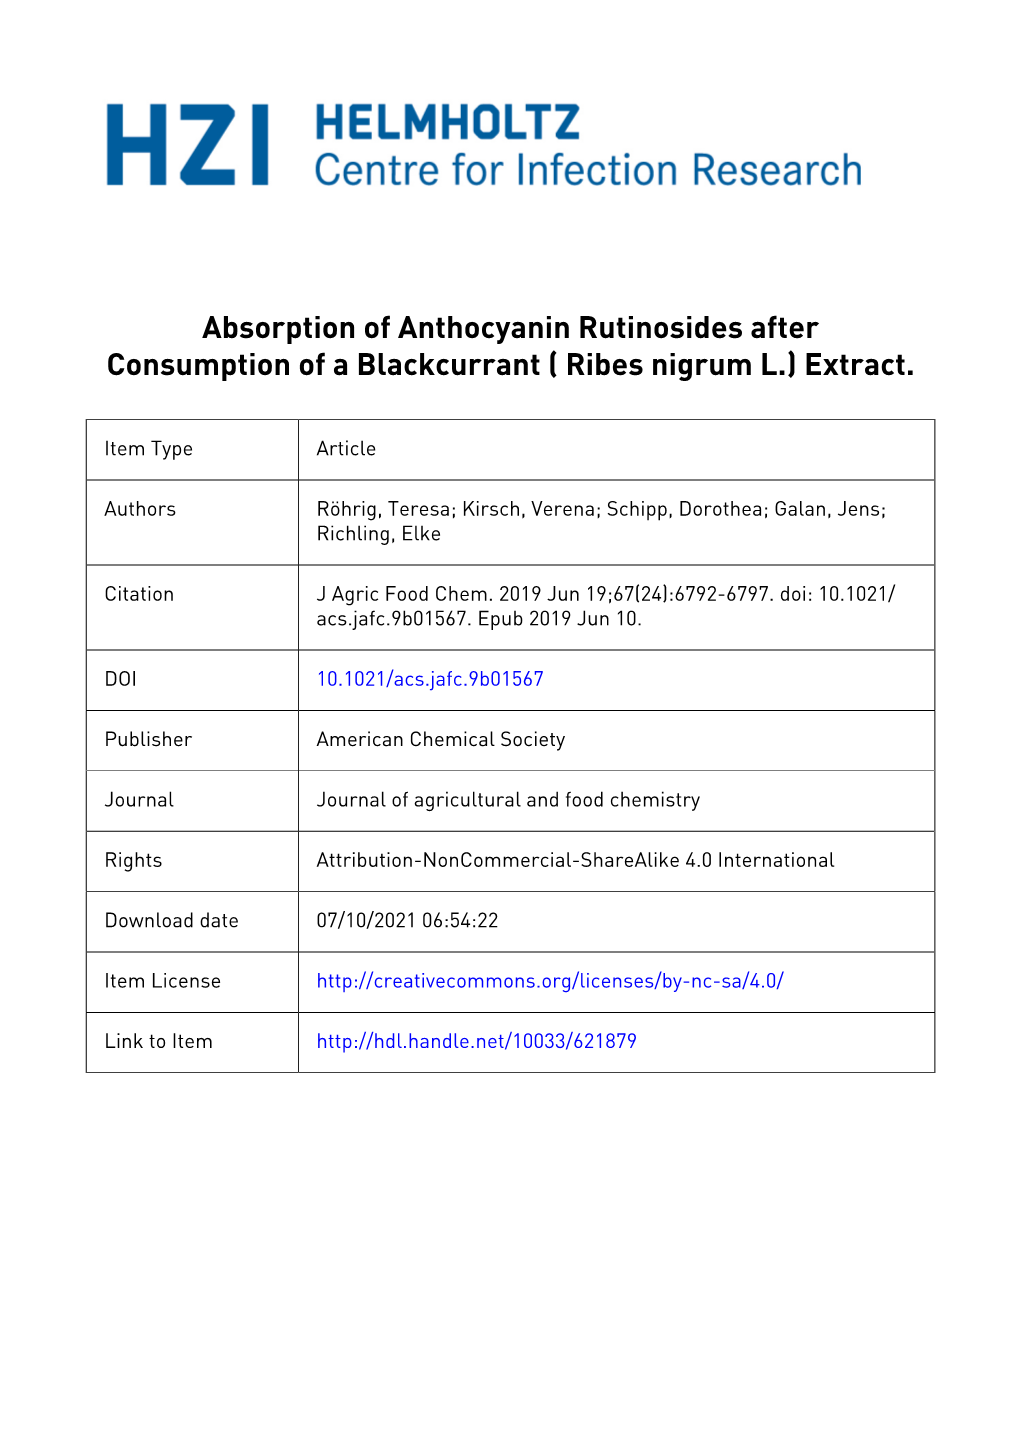 Absorption of Anthocyanin Rutinosides After Consumption of a Blackcurrant (Ribes Nigrum L.) Extract